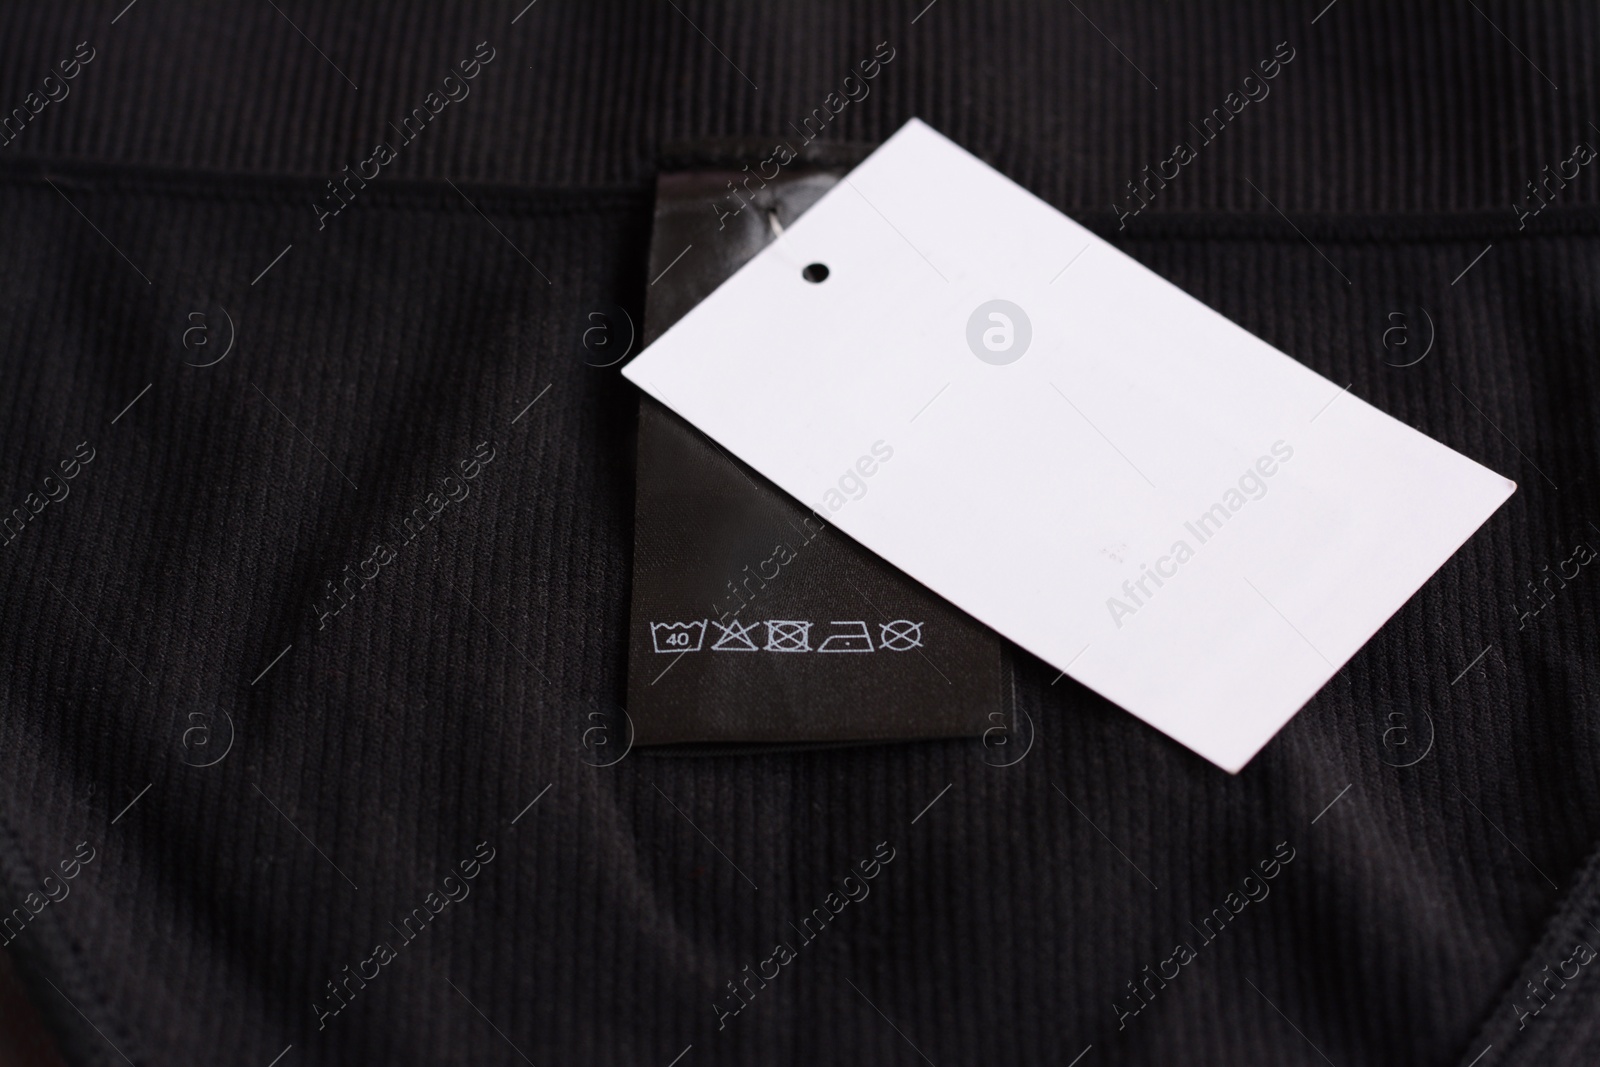 Photo of Clothing label with care information and tag on black garment